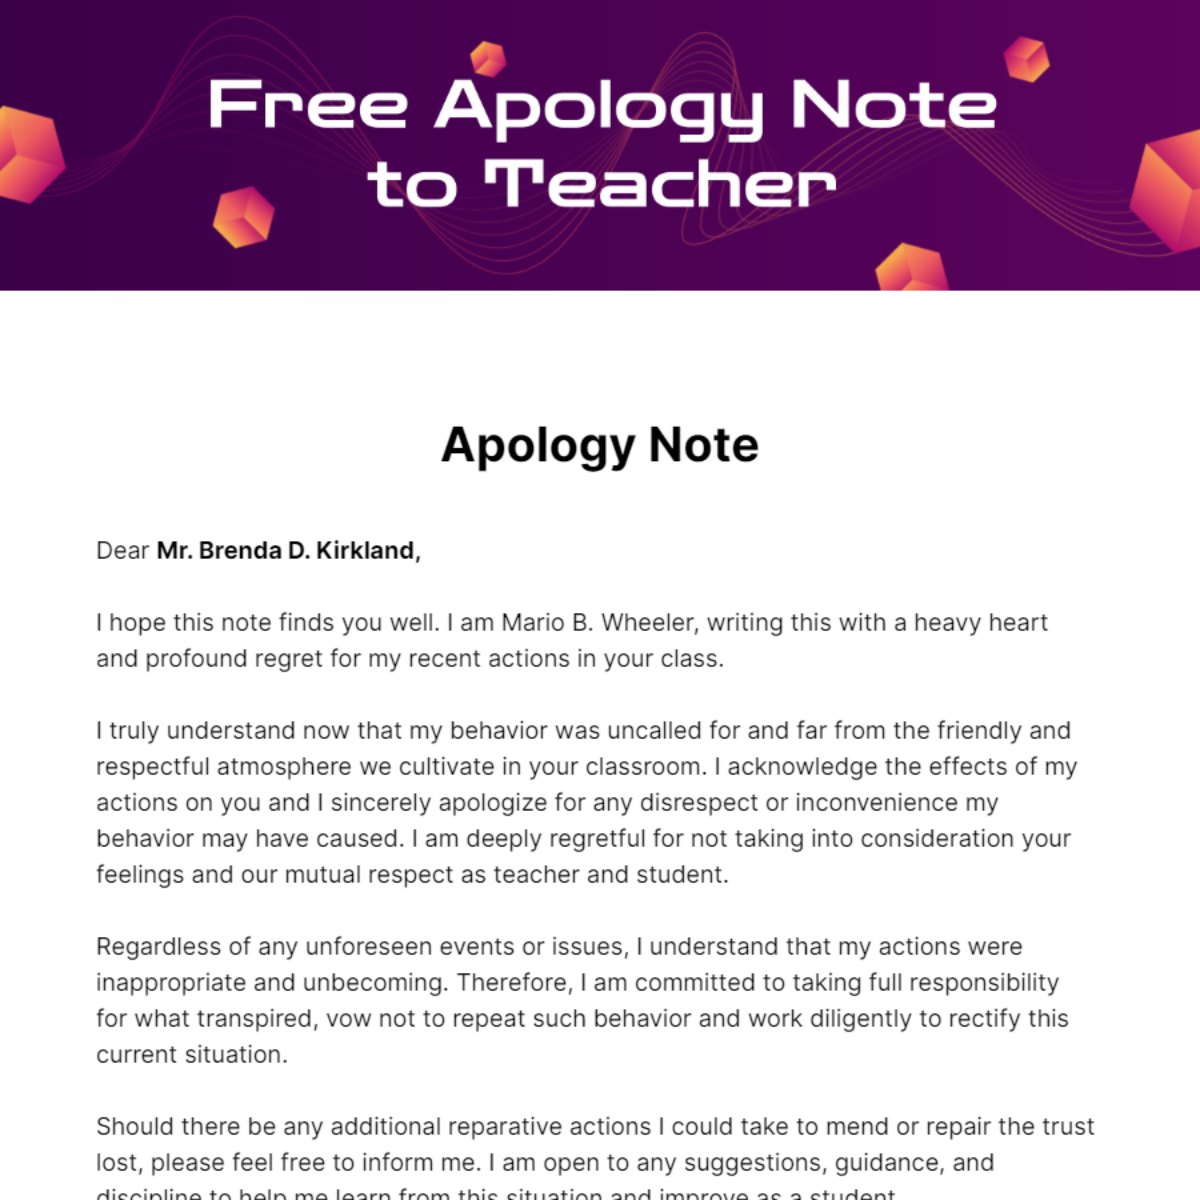 Apology Note to Teacher Template